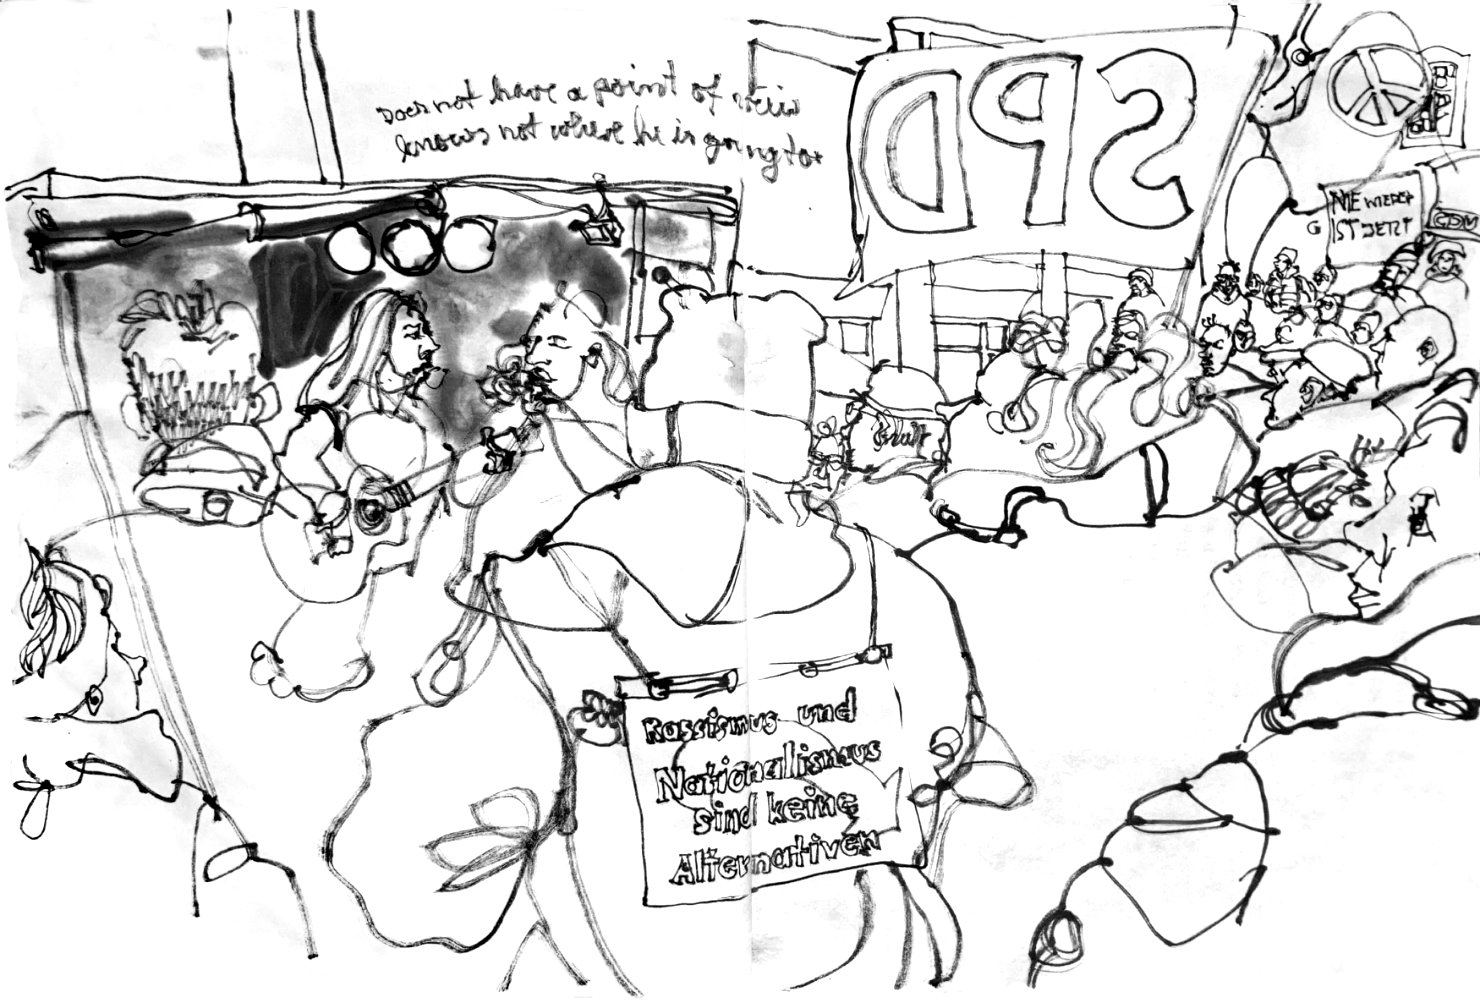 ink drawing from a protest against the right 